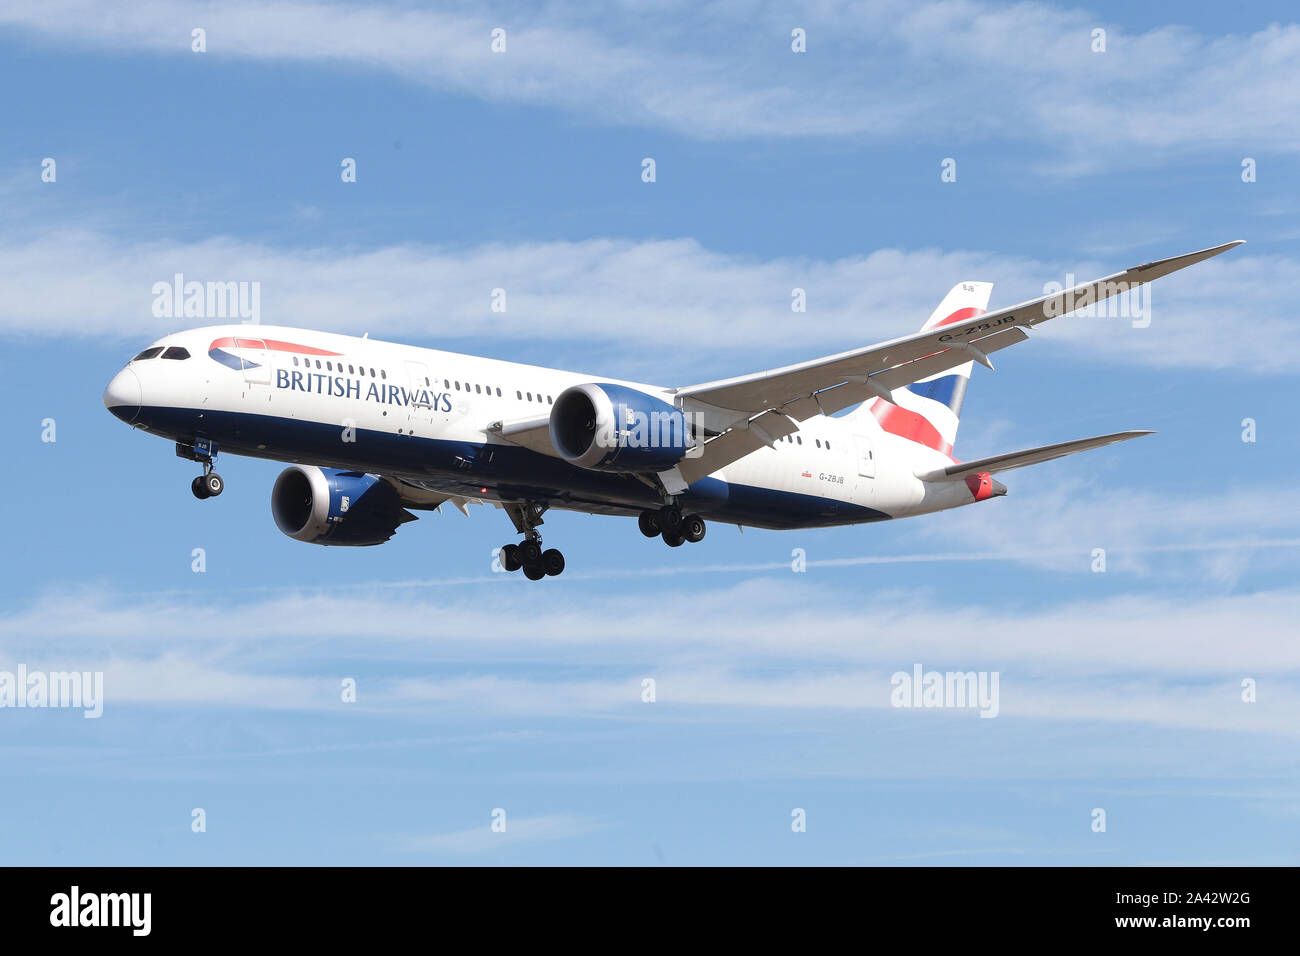 G-ZBJB British Airways Boeing 787-8 Dreamliner coming down to land at London Heathrow Airport in the United Kingdom Stock Photo